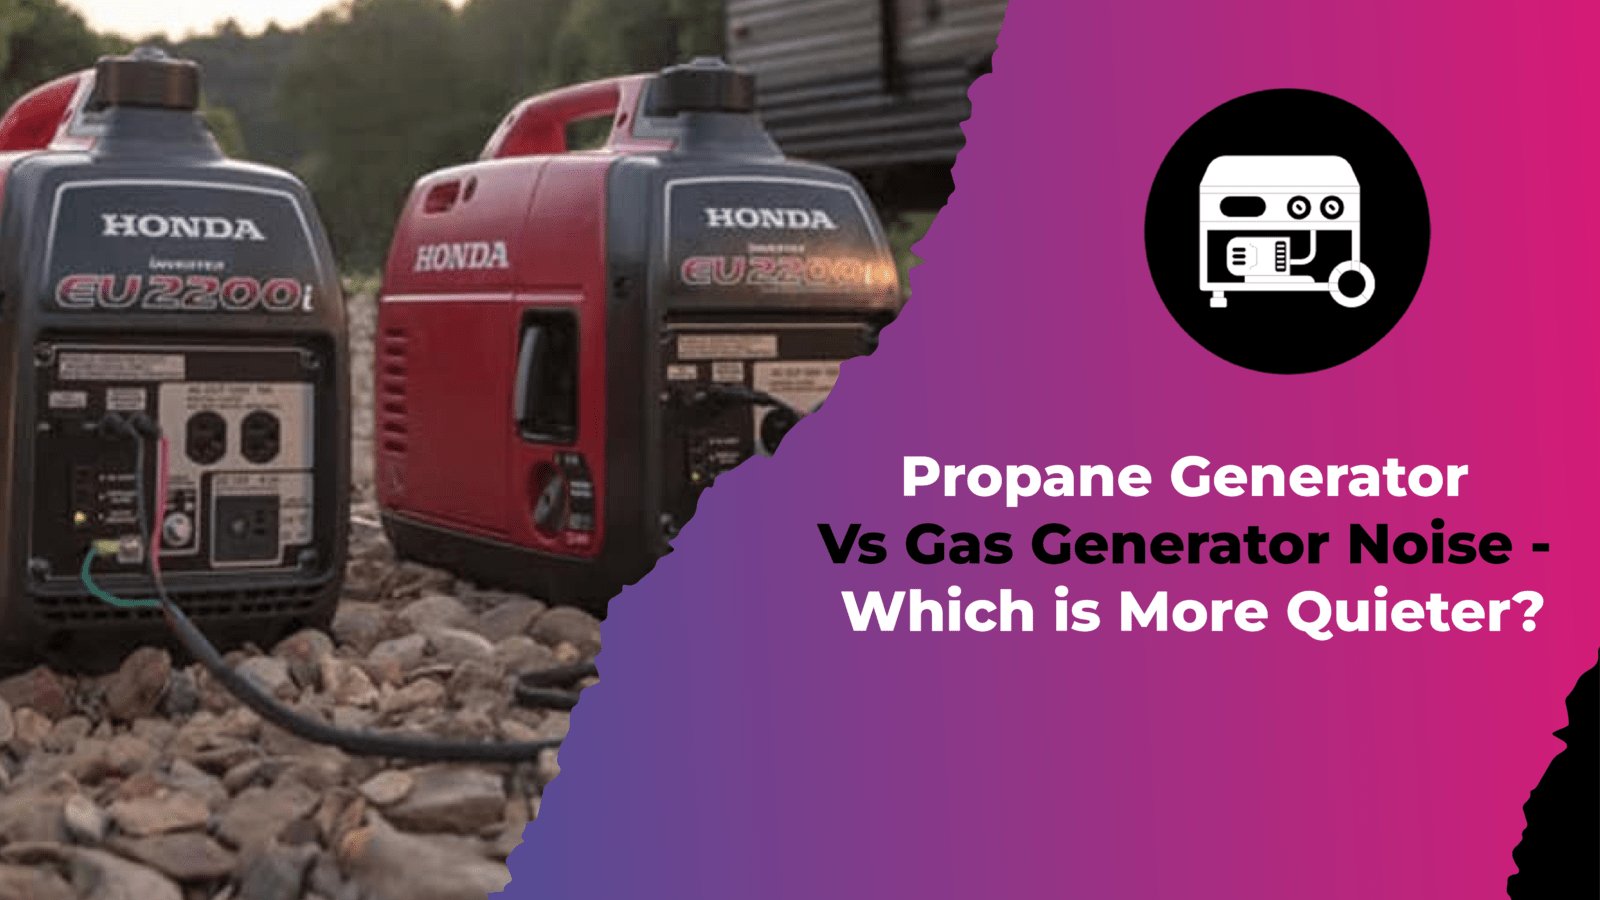 Propane Generator Vs Gas Generator Noise - Which is More Quieter